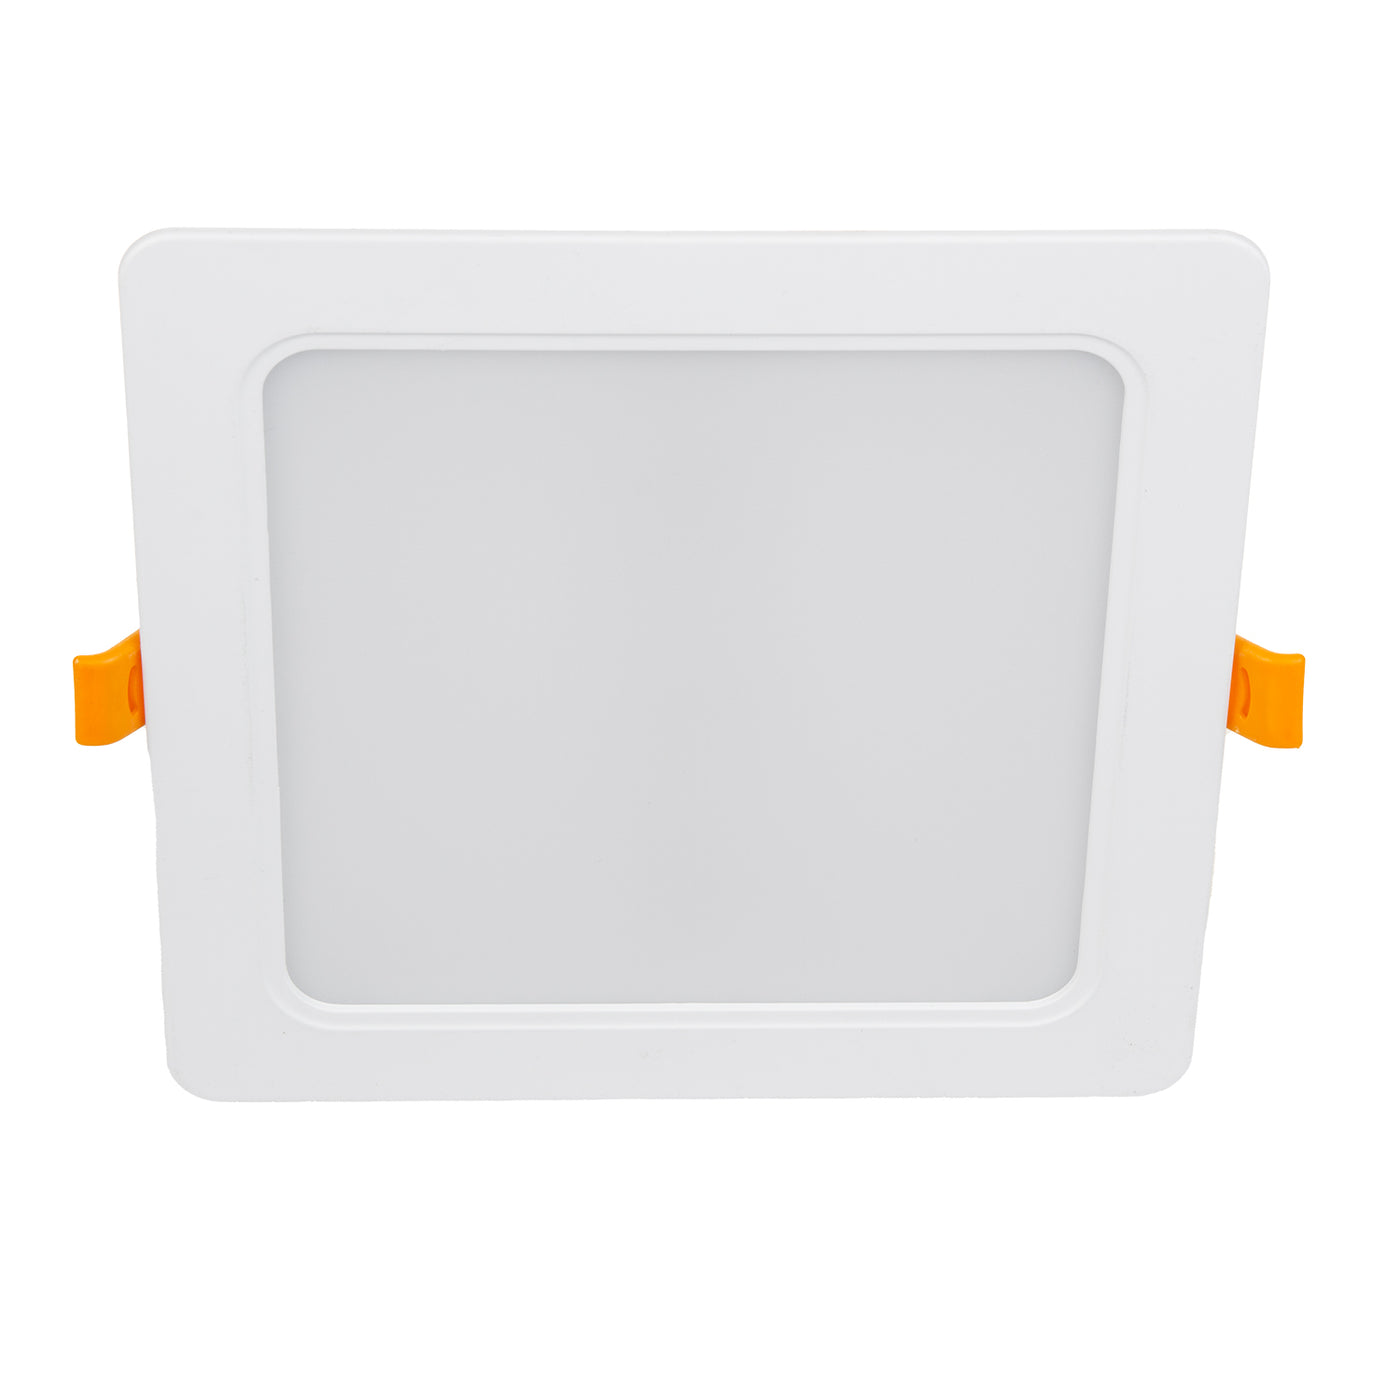 5x panel LED sufitowy Maclean, podtynkowy SLIM, 18W, Neutral White 4000K, 170*170*26mm, 1900lm, MCE374 S